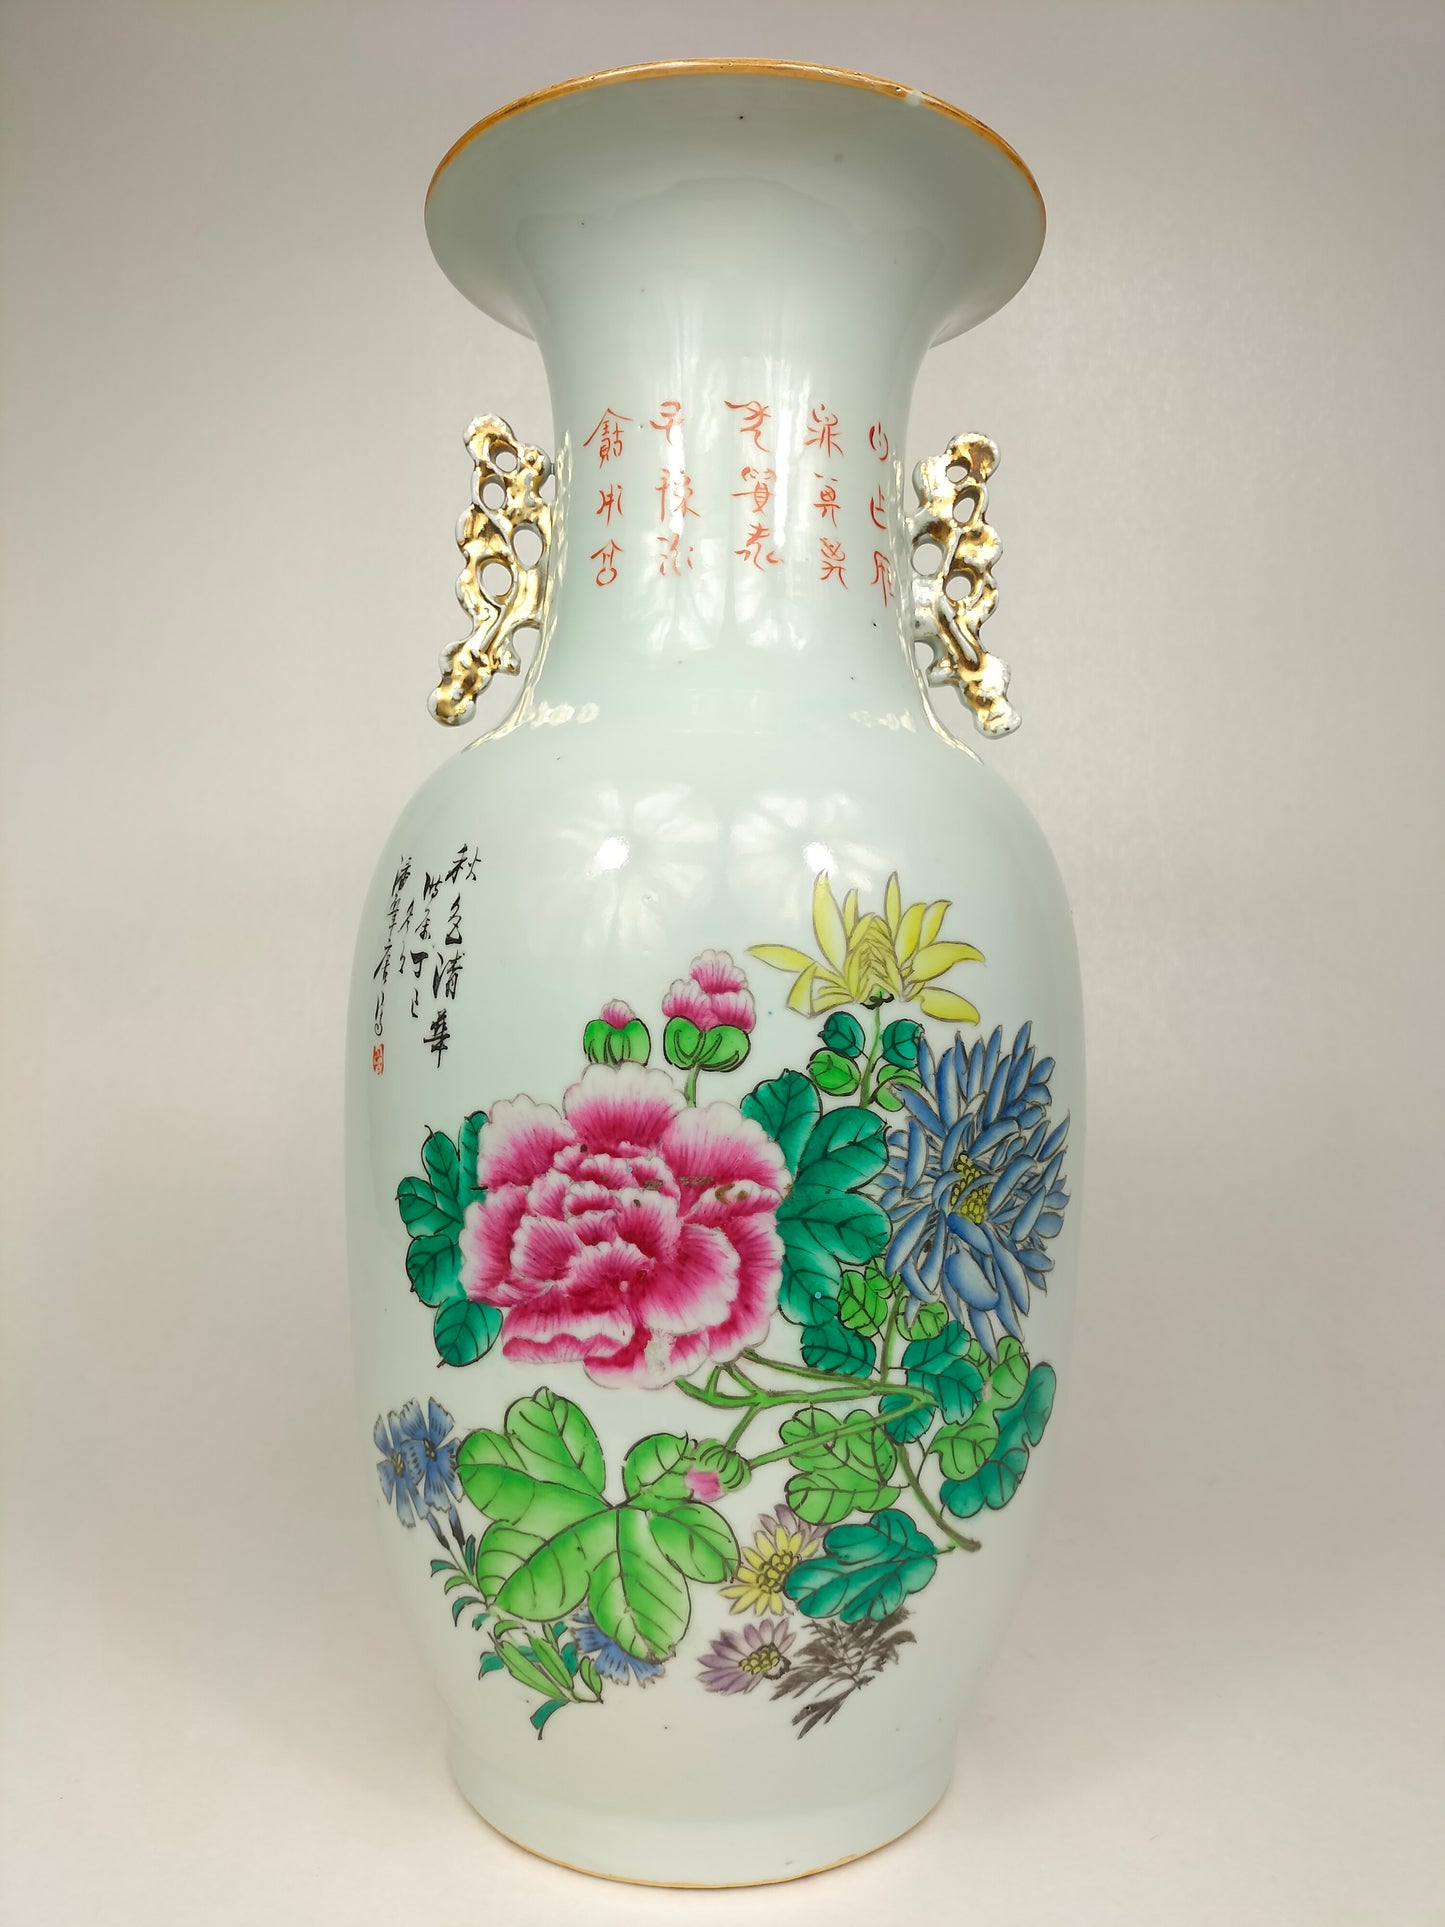 Antique Chinese vase decorated with sages and flowers // Artist signed - Republic Period (1912-1949)